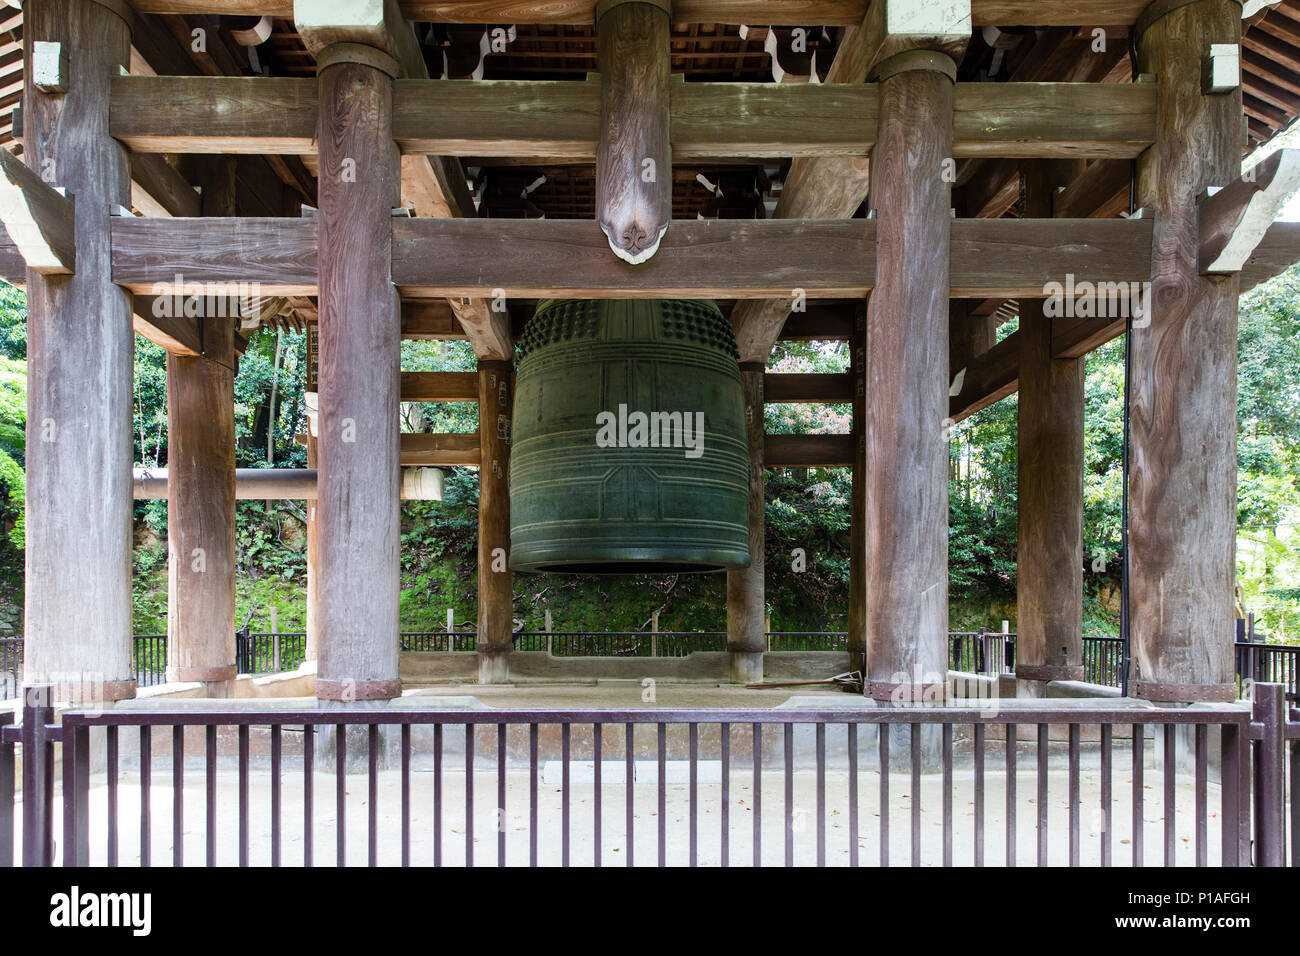 The Bell of Chion-in Temple, the Largest Bell in Japan. Stock Photo